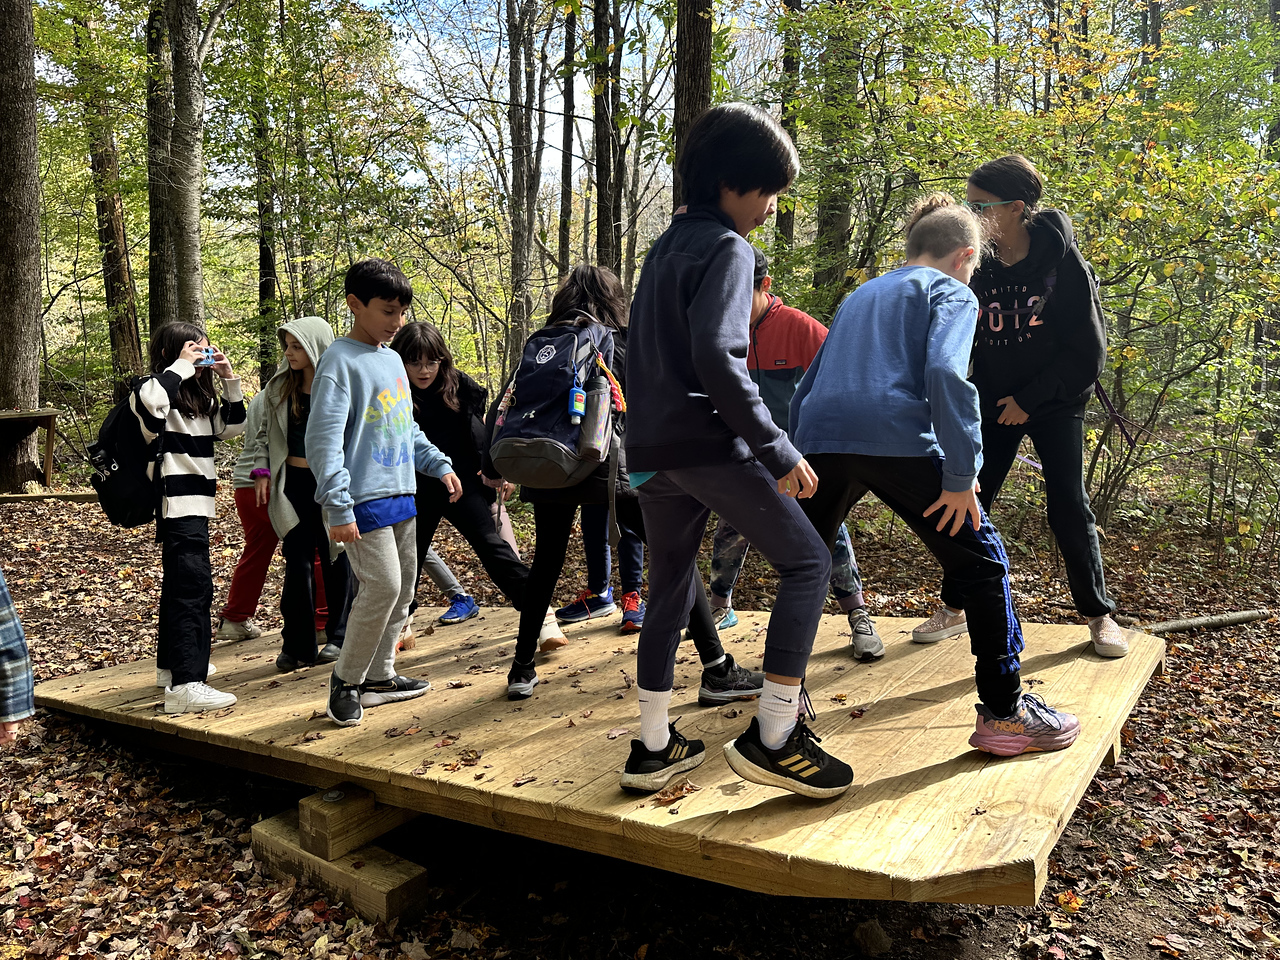 Students work together to complete ropes course challenge.